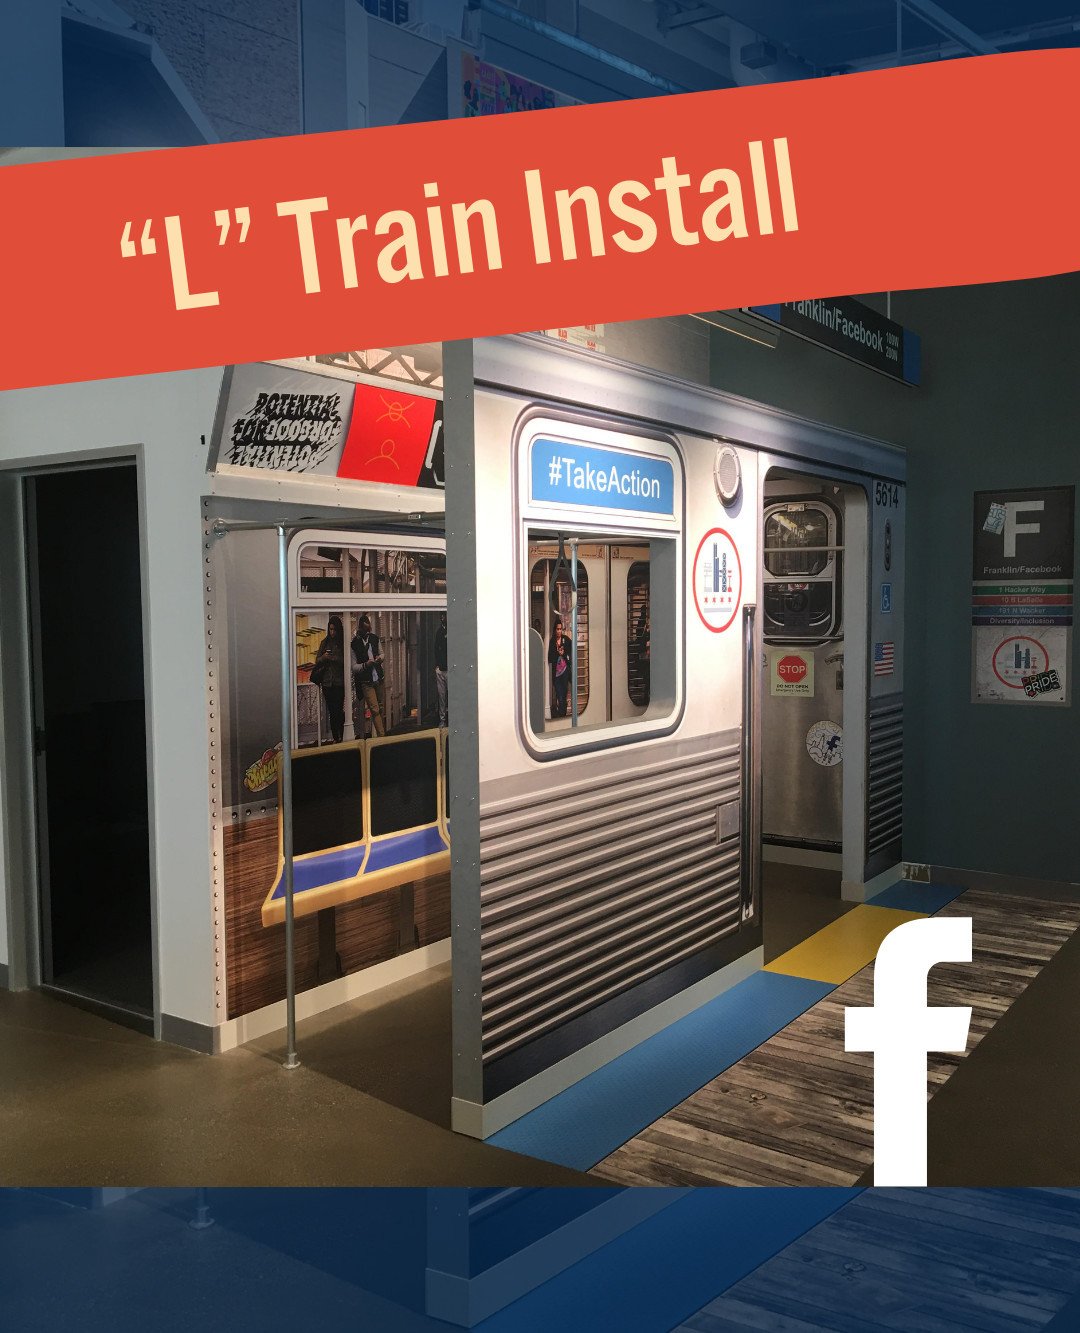 Scout installed an &ldquo;L&rdquo; Train exhibit at the @facebook/ @meta office in the Chicago Loop 🚋

#scoutsourcingparnters #meta #facebook #facebookchicago #chicagoloop